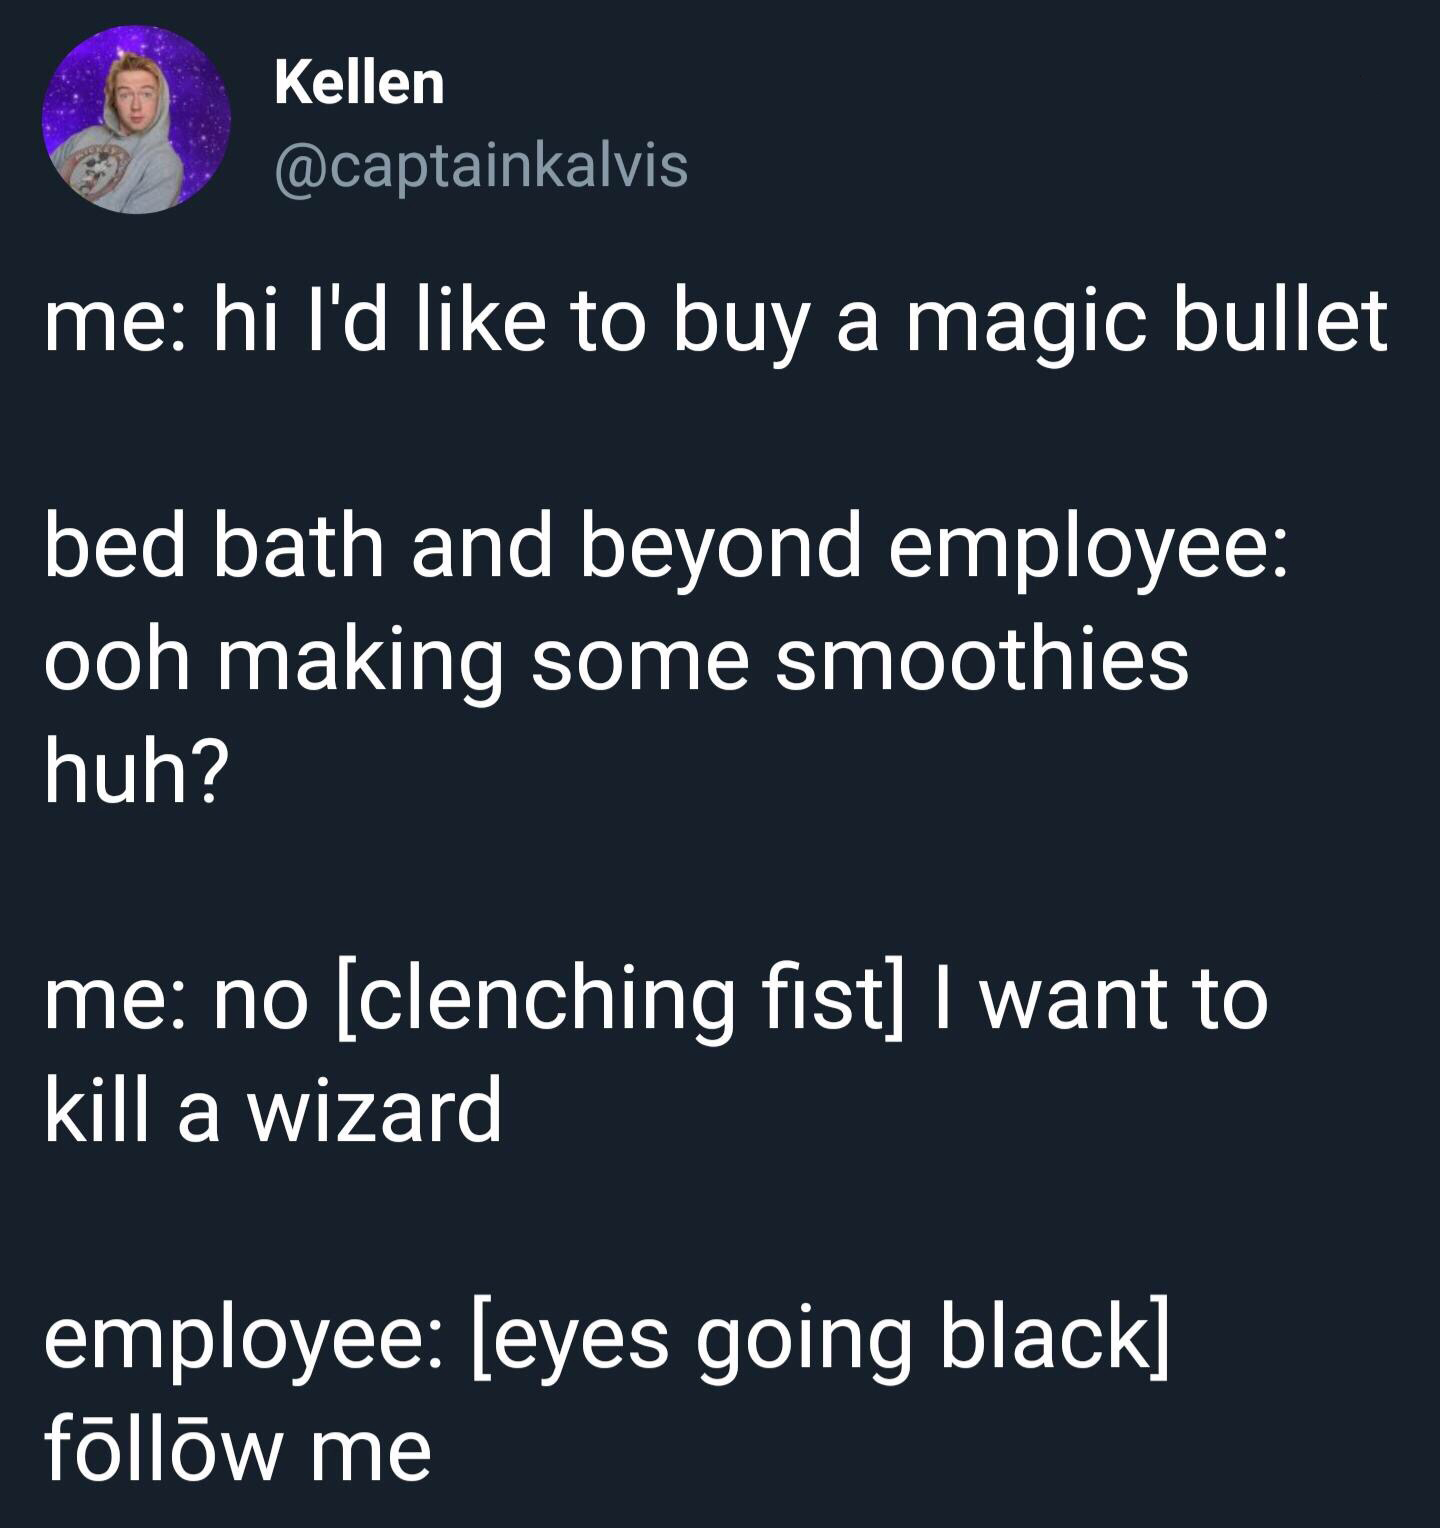 lyrics - Kellen me hi I'd to buy a magic bullet bed bath and beyond employee ooh making some smoothies huh? me no clenching fist I want to kill a wizard employee eyes going black me